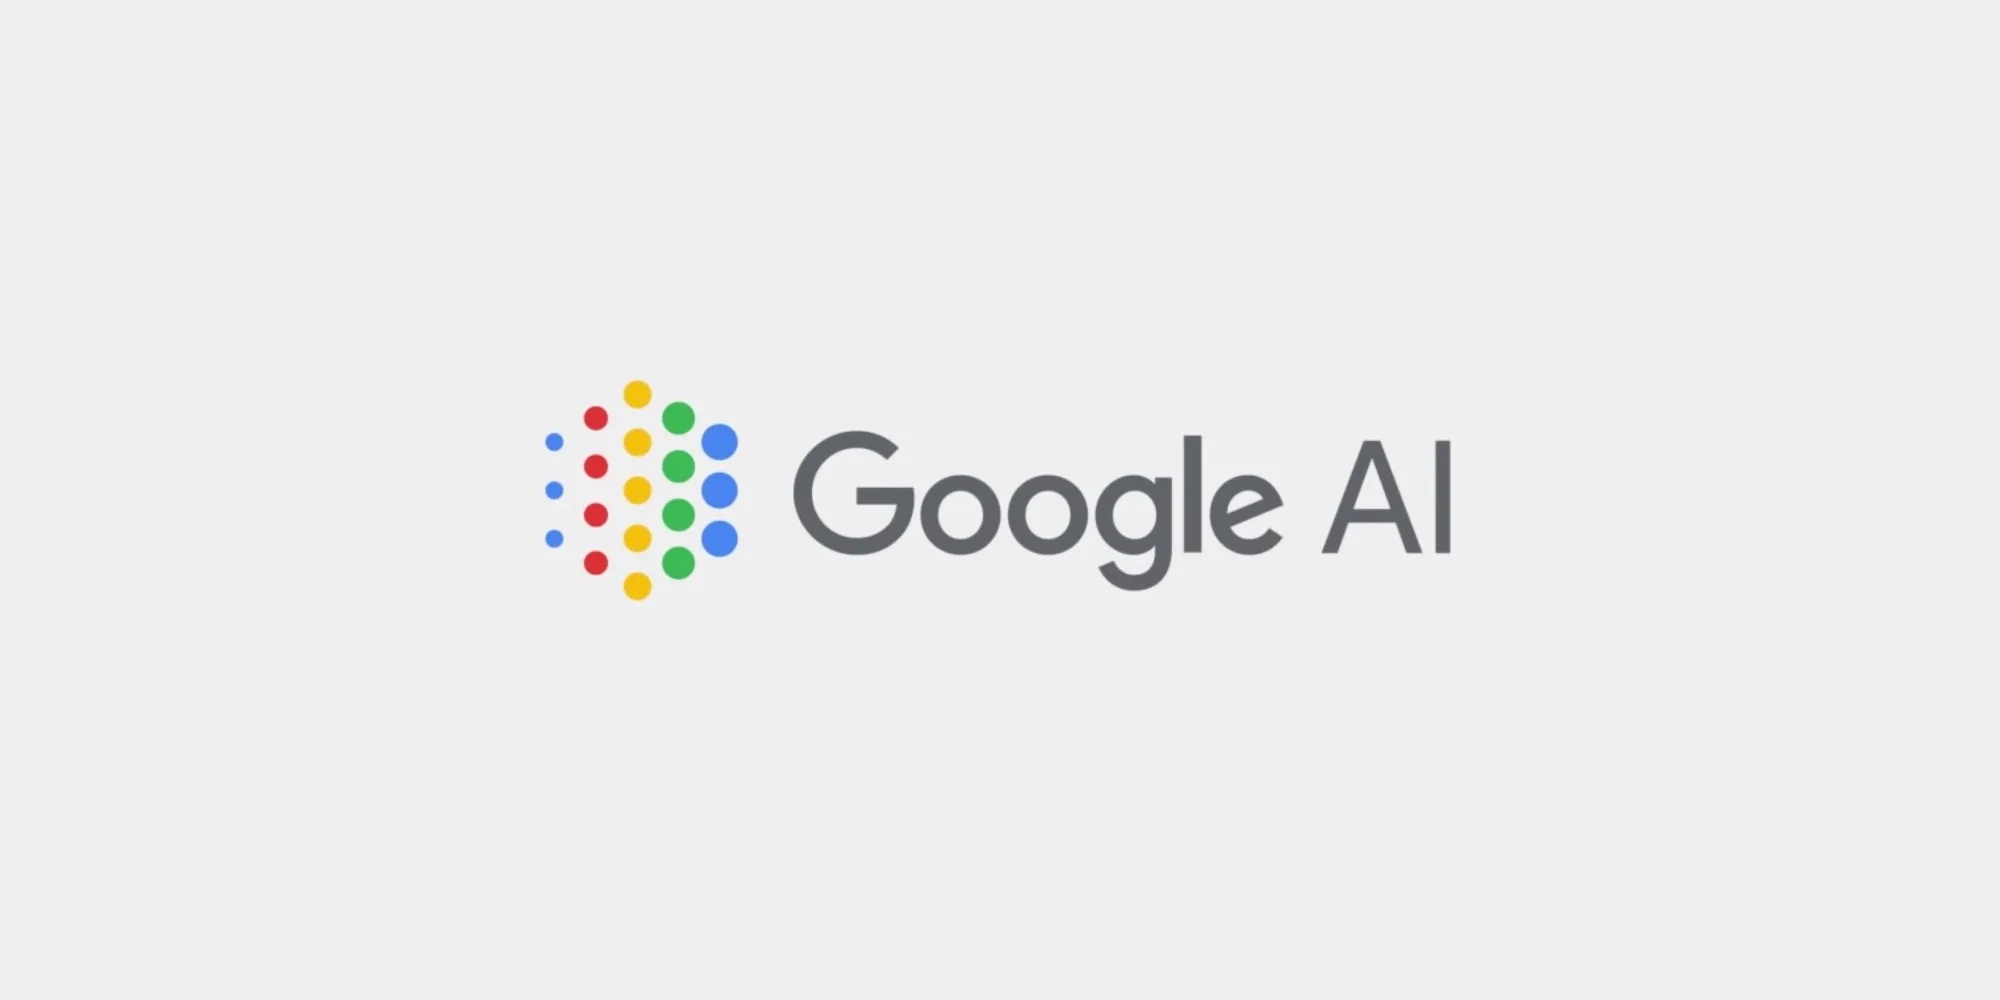 How To Turn On Google Ai Generative Search Right Now